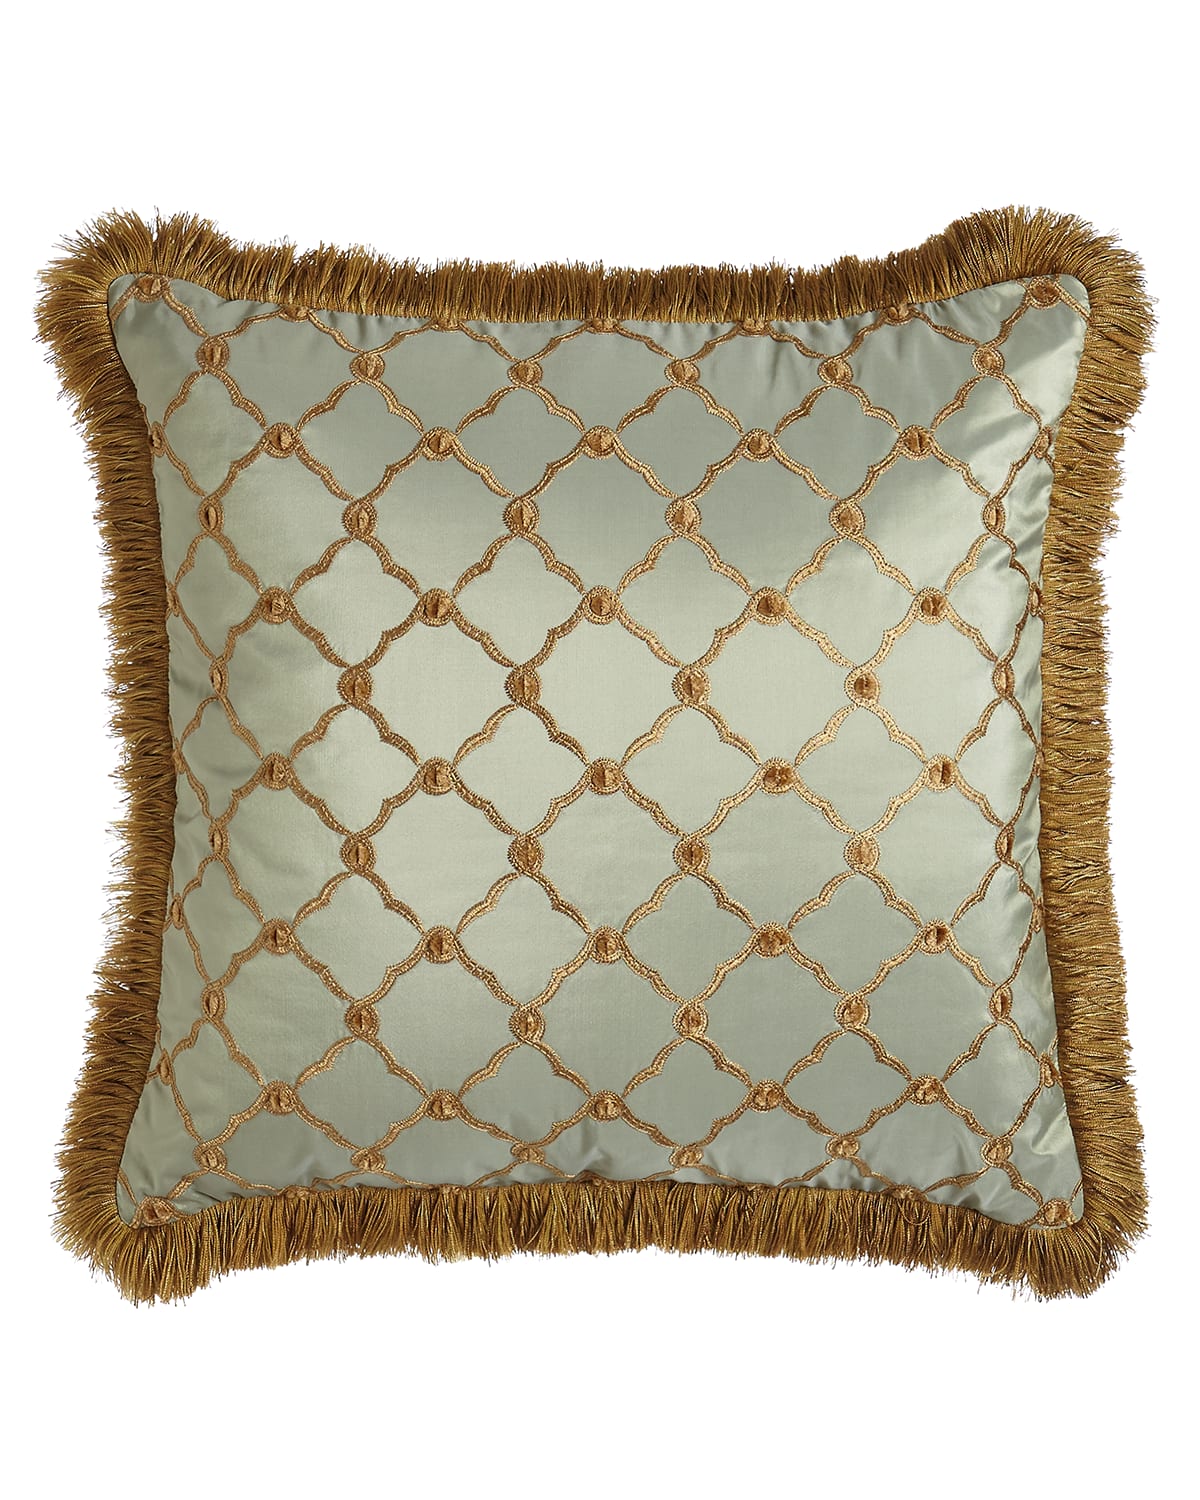 Image Dian Austin Couture Home Tuscan Trellis Square Pillow with Brush Fringe, 20"Sq.